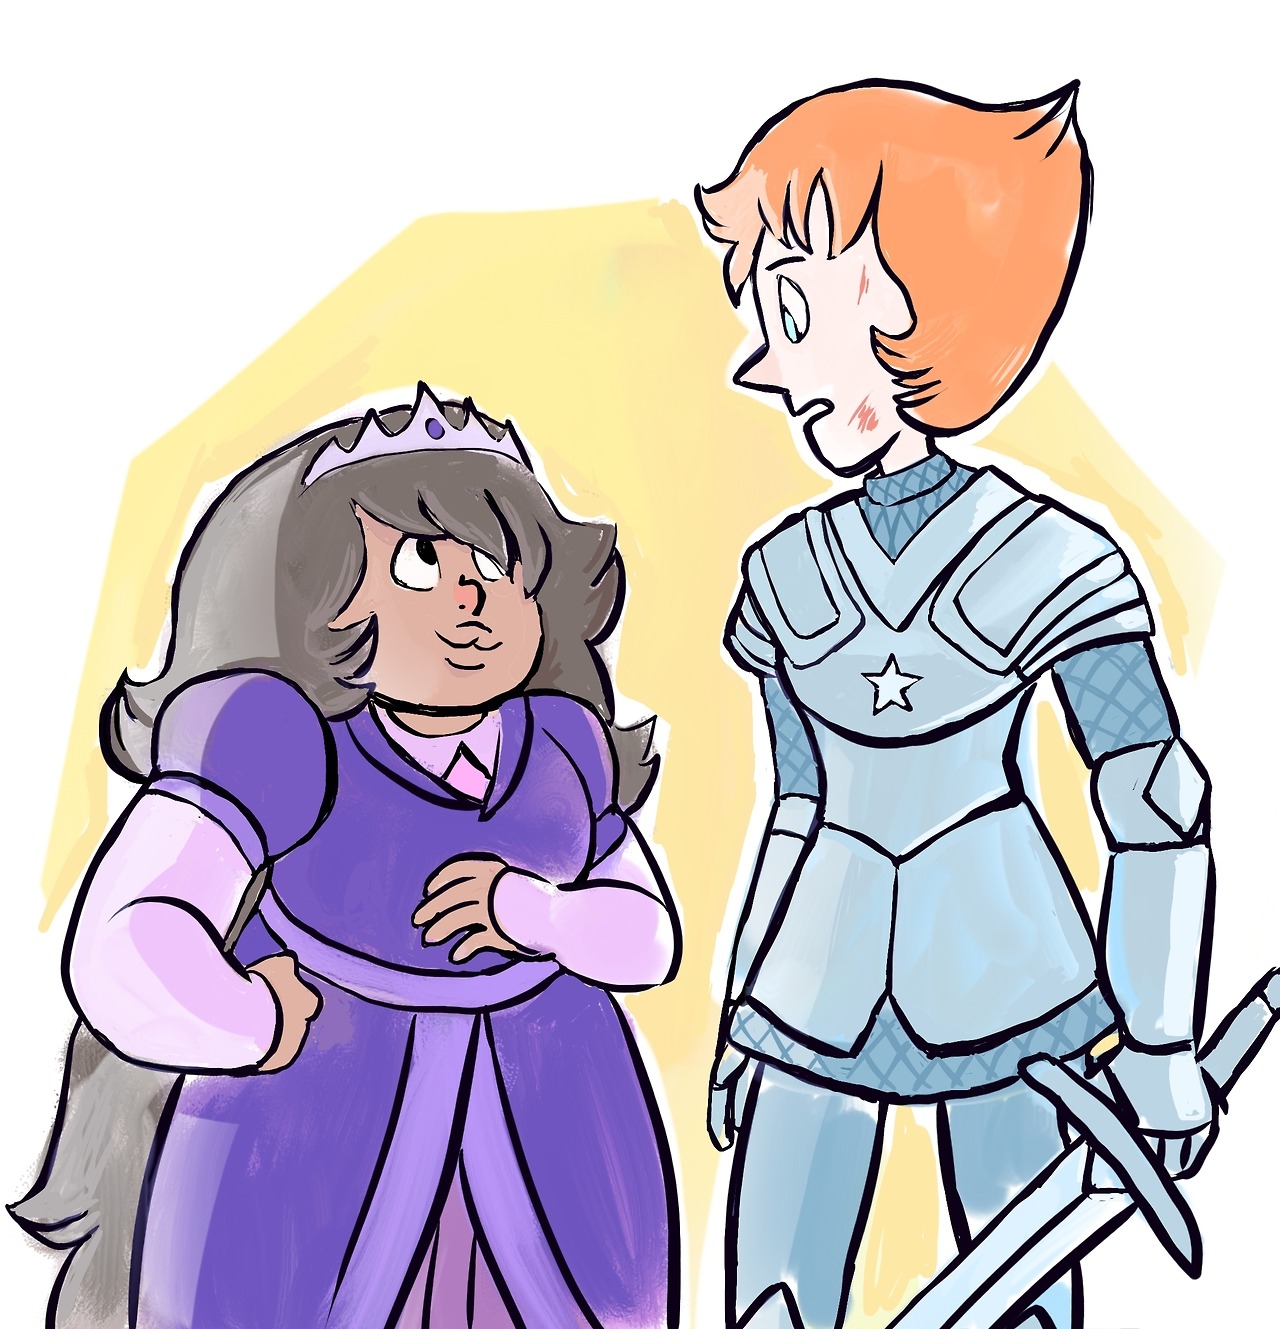 Pearlmethyst week day 5: The princess & the knight @annadesu This prompt lends itself more to fanfiction ¯\_(ツ)_/¯ —- Pearl felt like a helpless mouse under the claws of a cat. Just a second of...